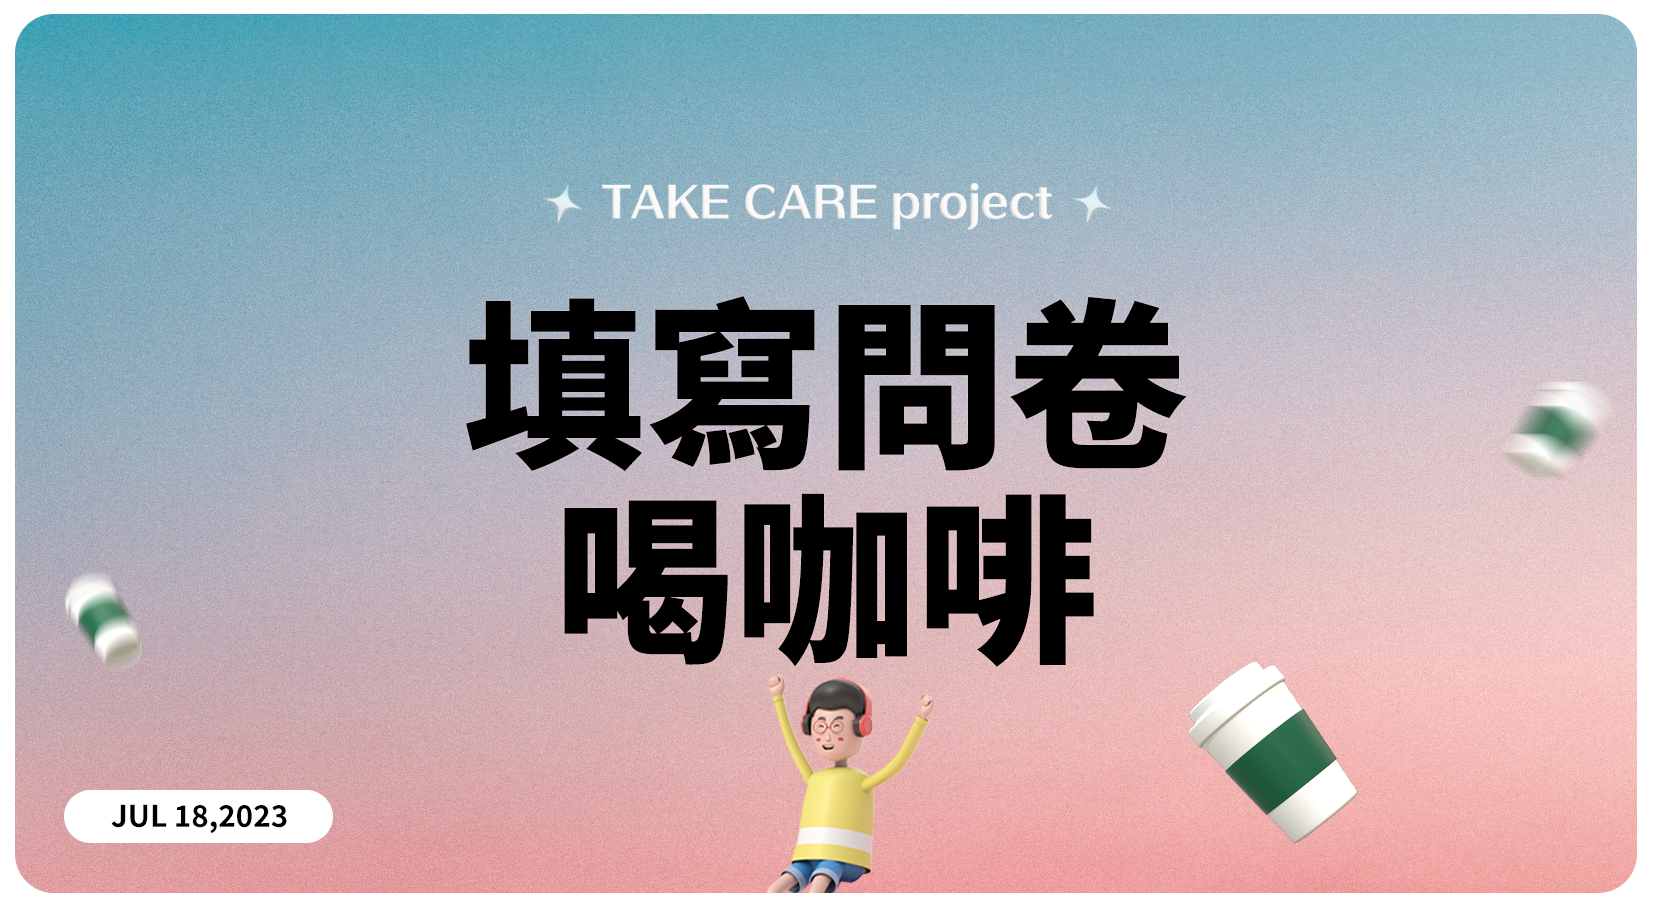 TAKE CARE project填寫問卷喝咖啡